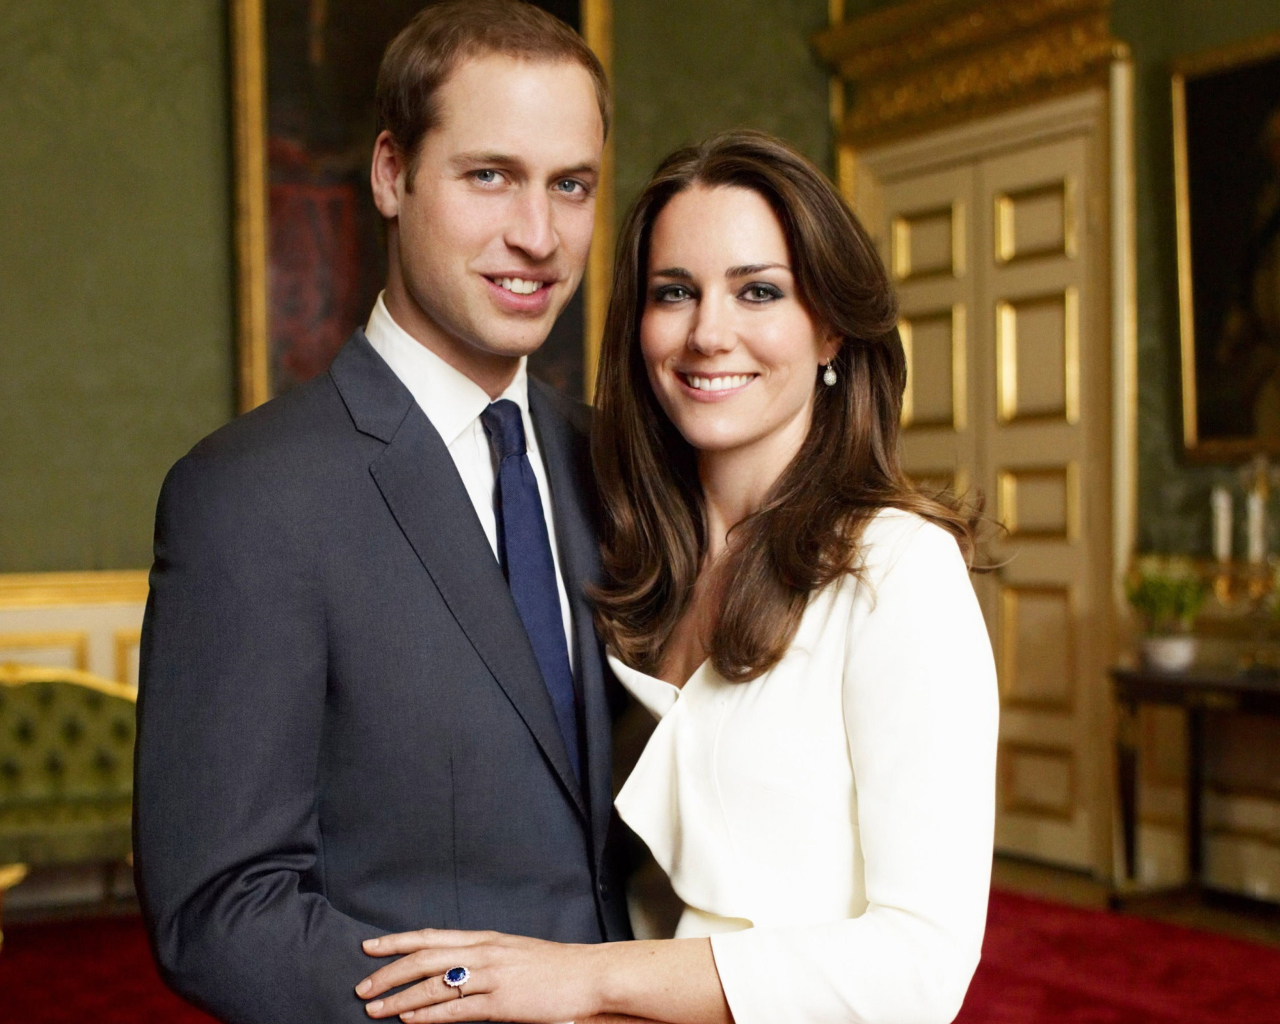 Prince William And Kate Middleton wallpaper 1280x1024